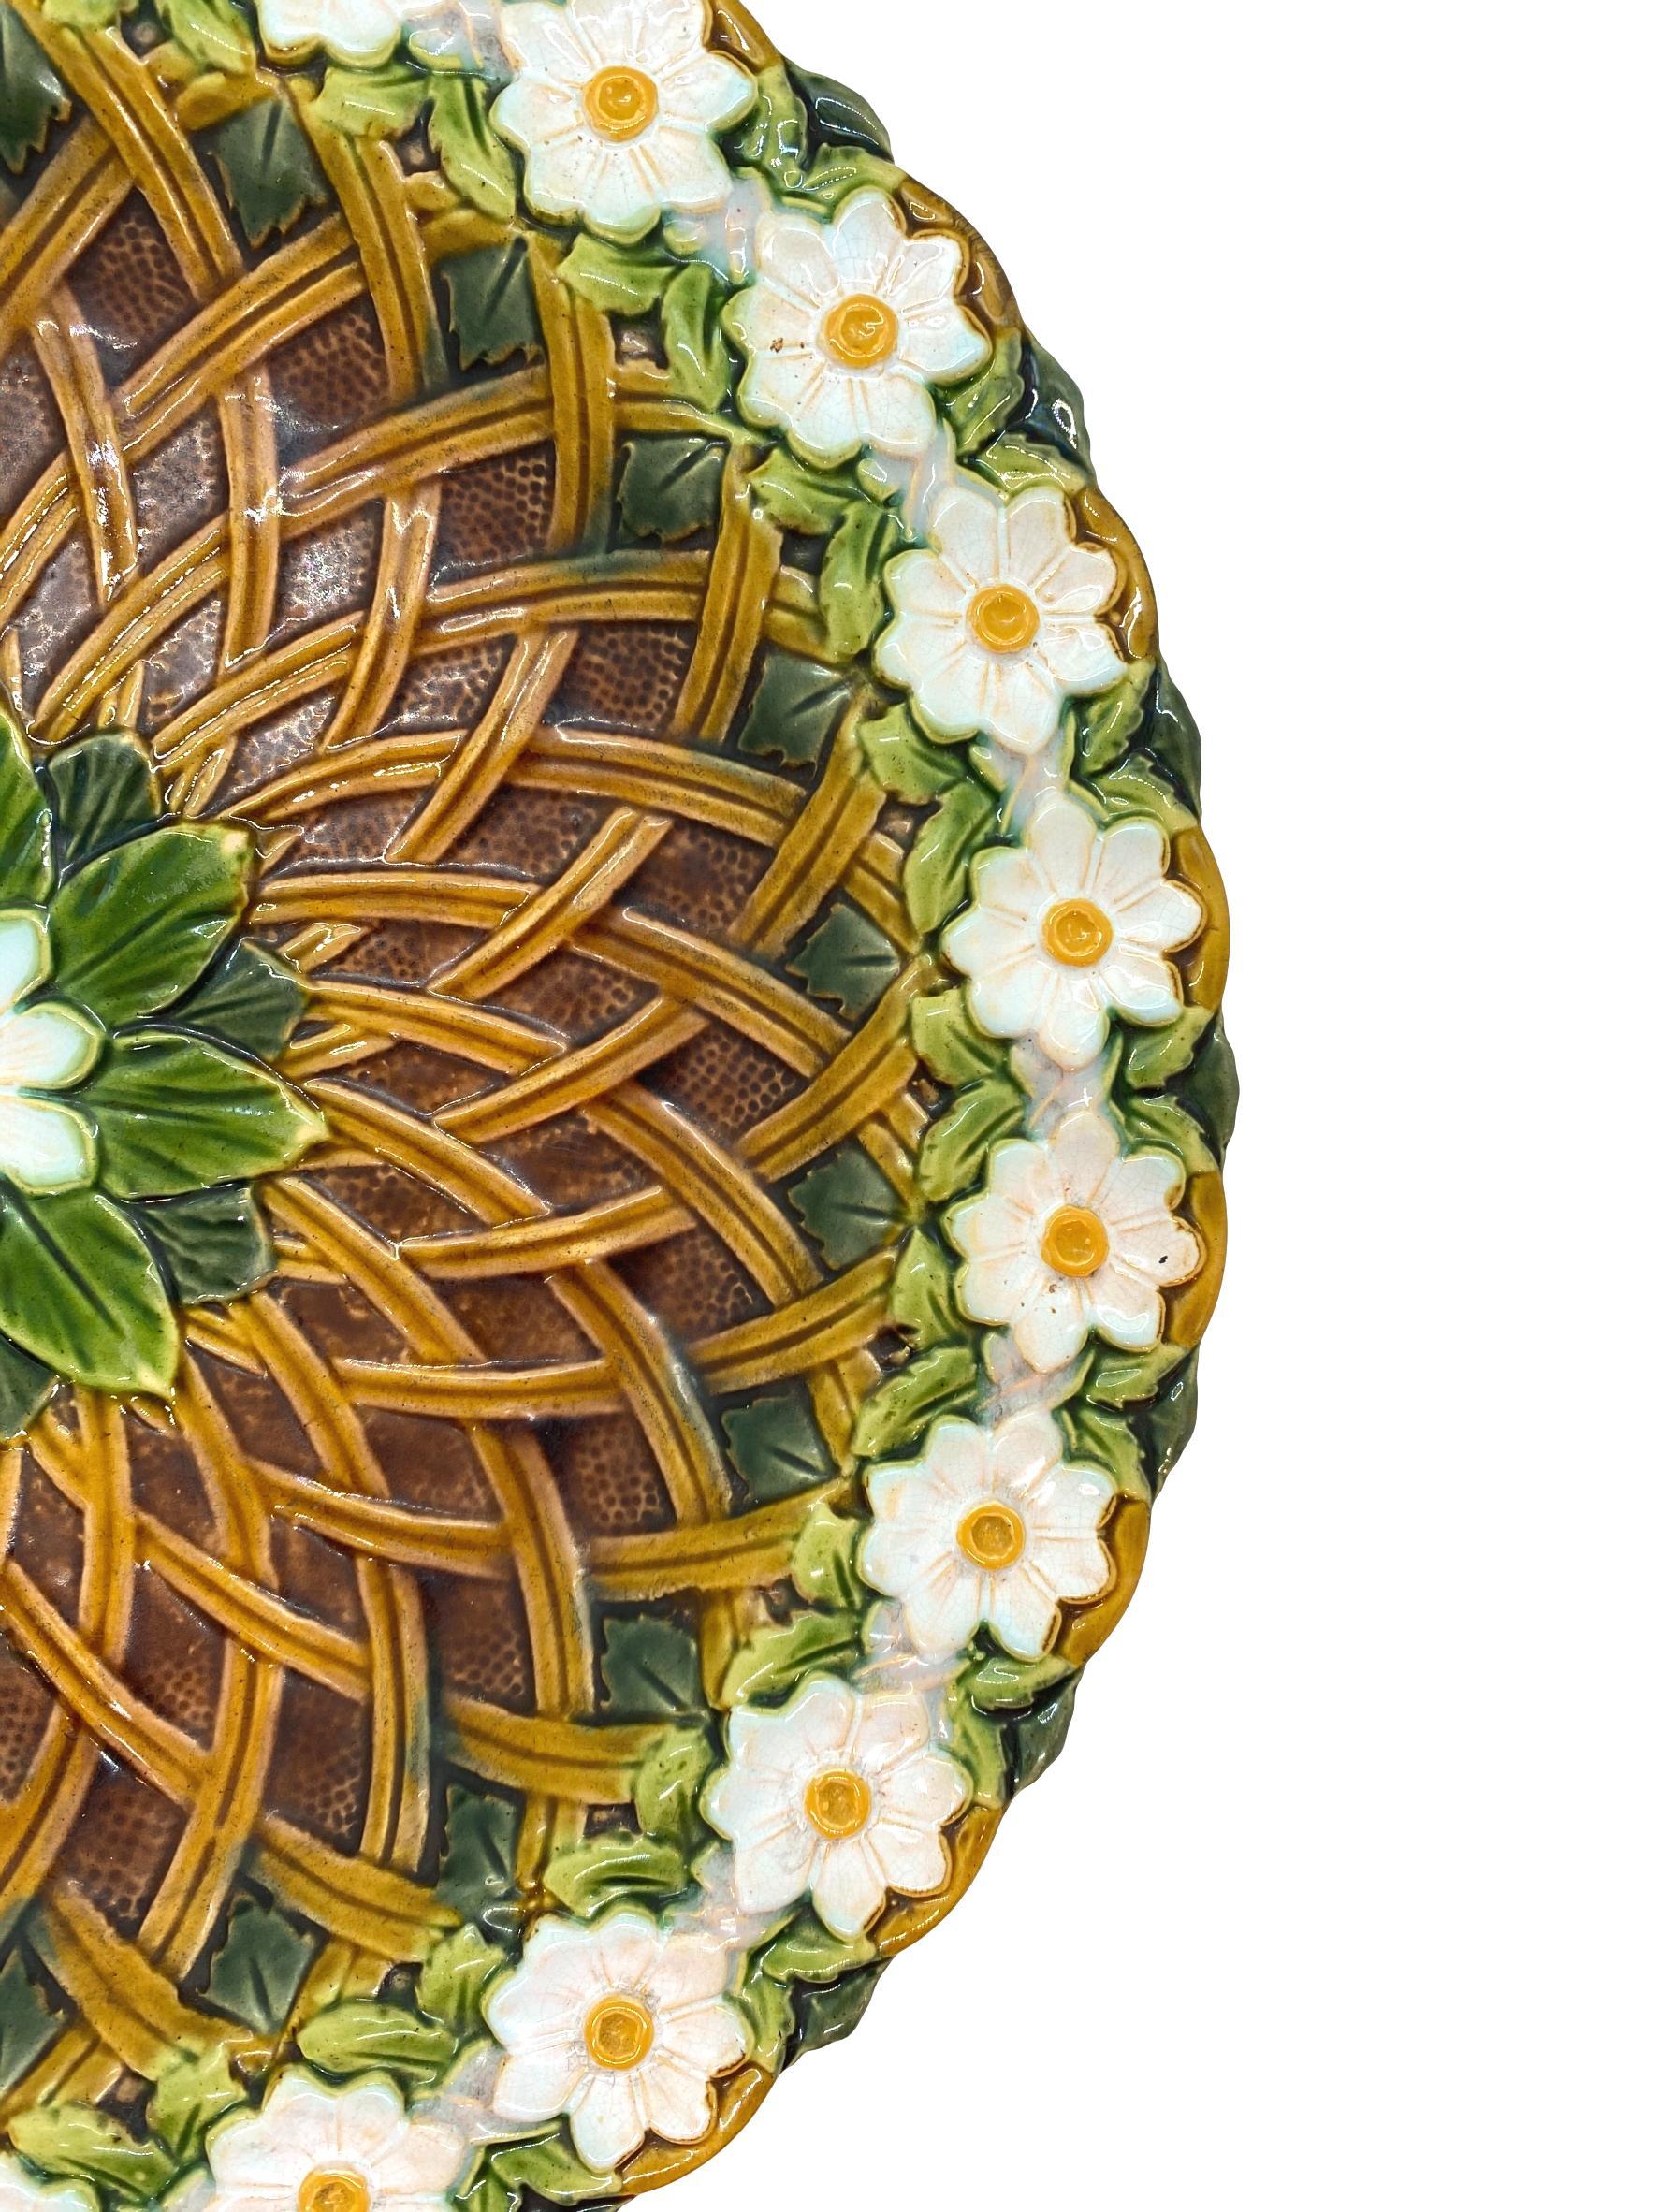 English Minton Majolica Platter with Lattice Work and Daisy Chain Border, Dated 1880 For Sale